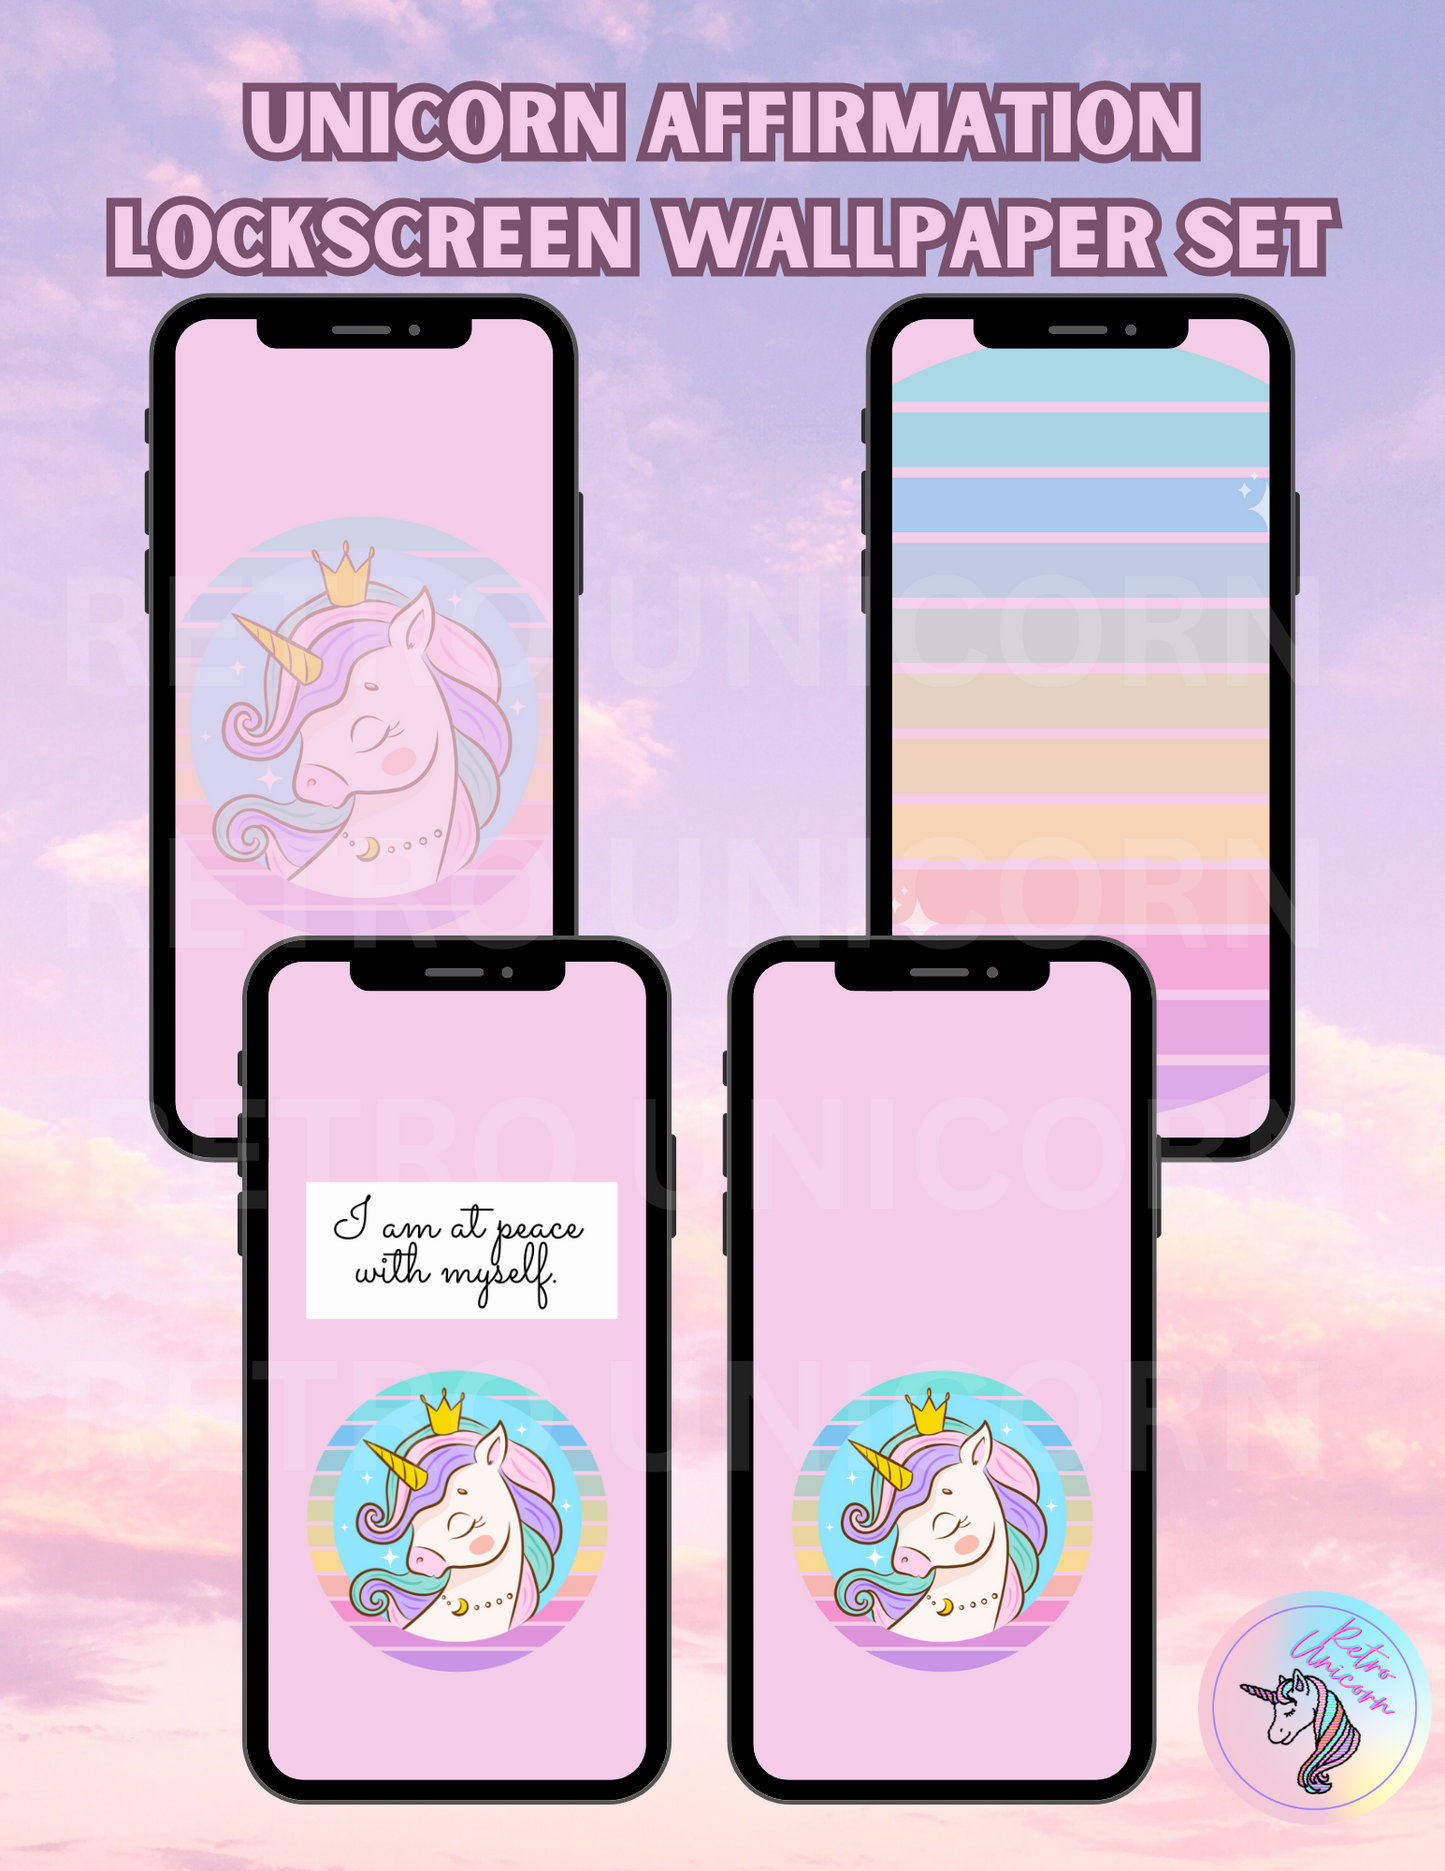 Unicorn Affirmation Phone Wallpapers - "Peace" [Set of 4]